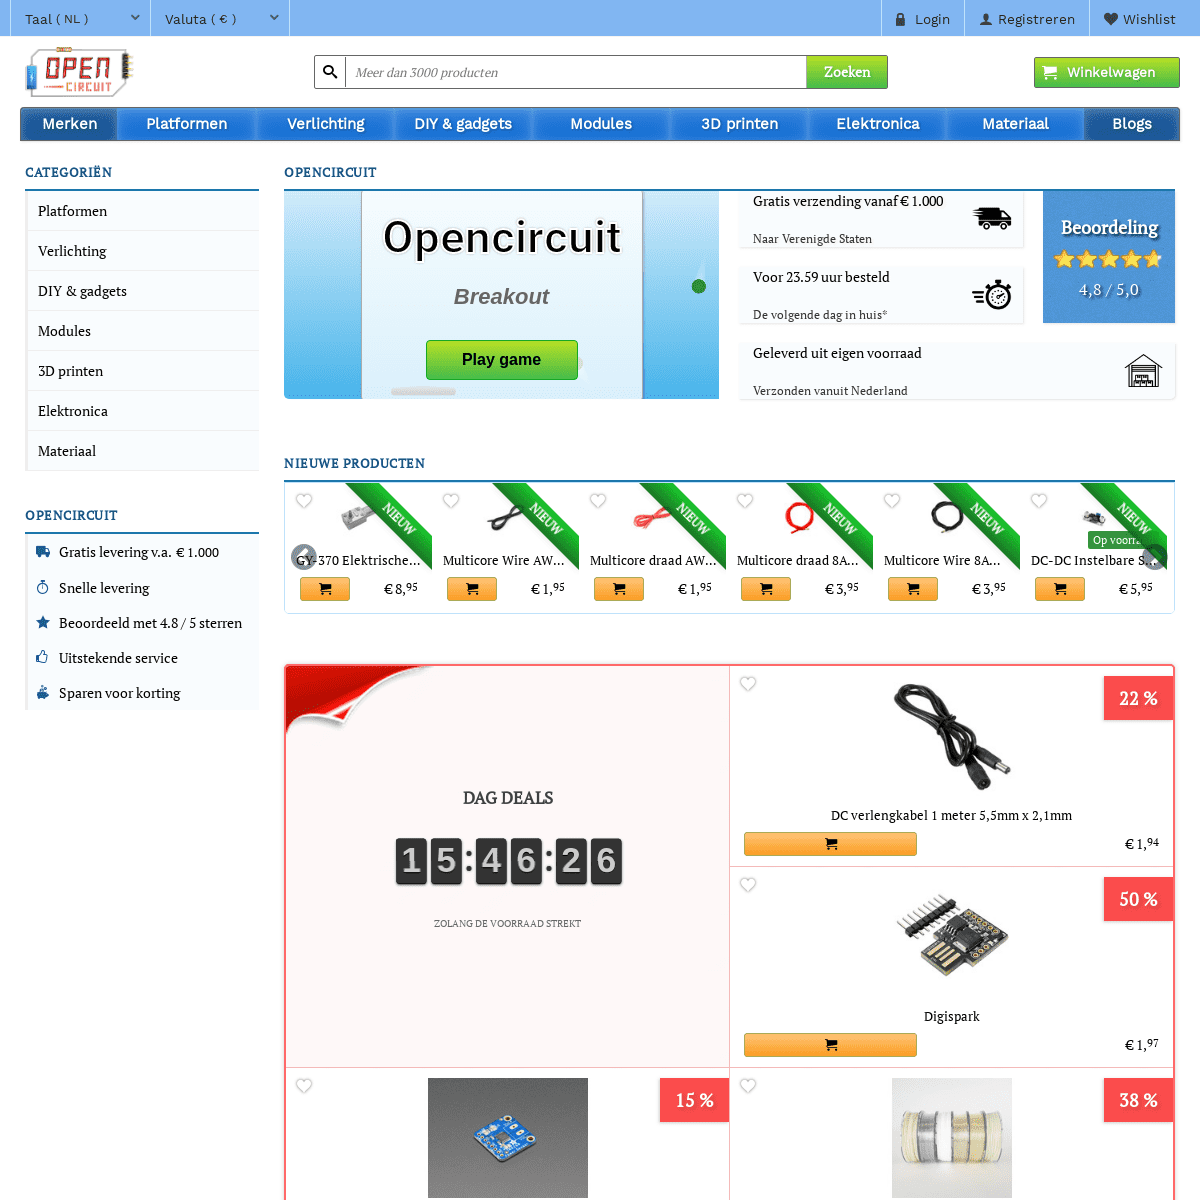 A complete backup of opencircuit.nl